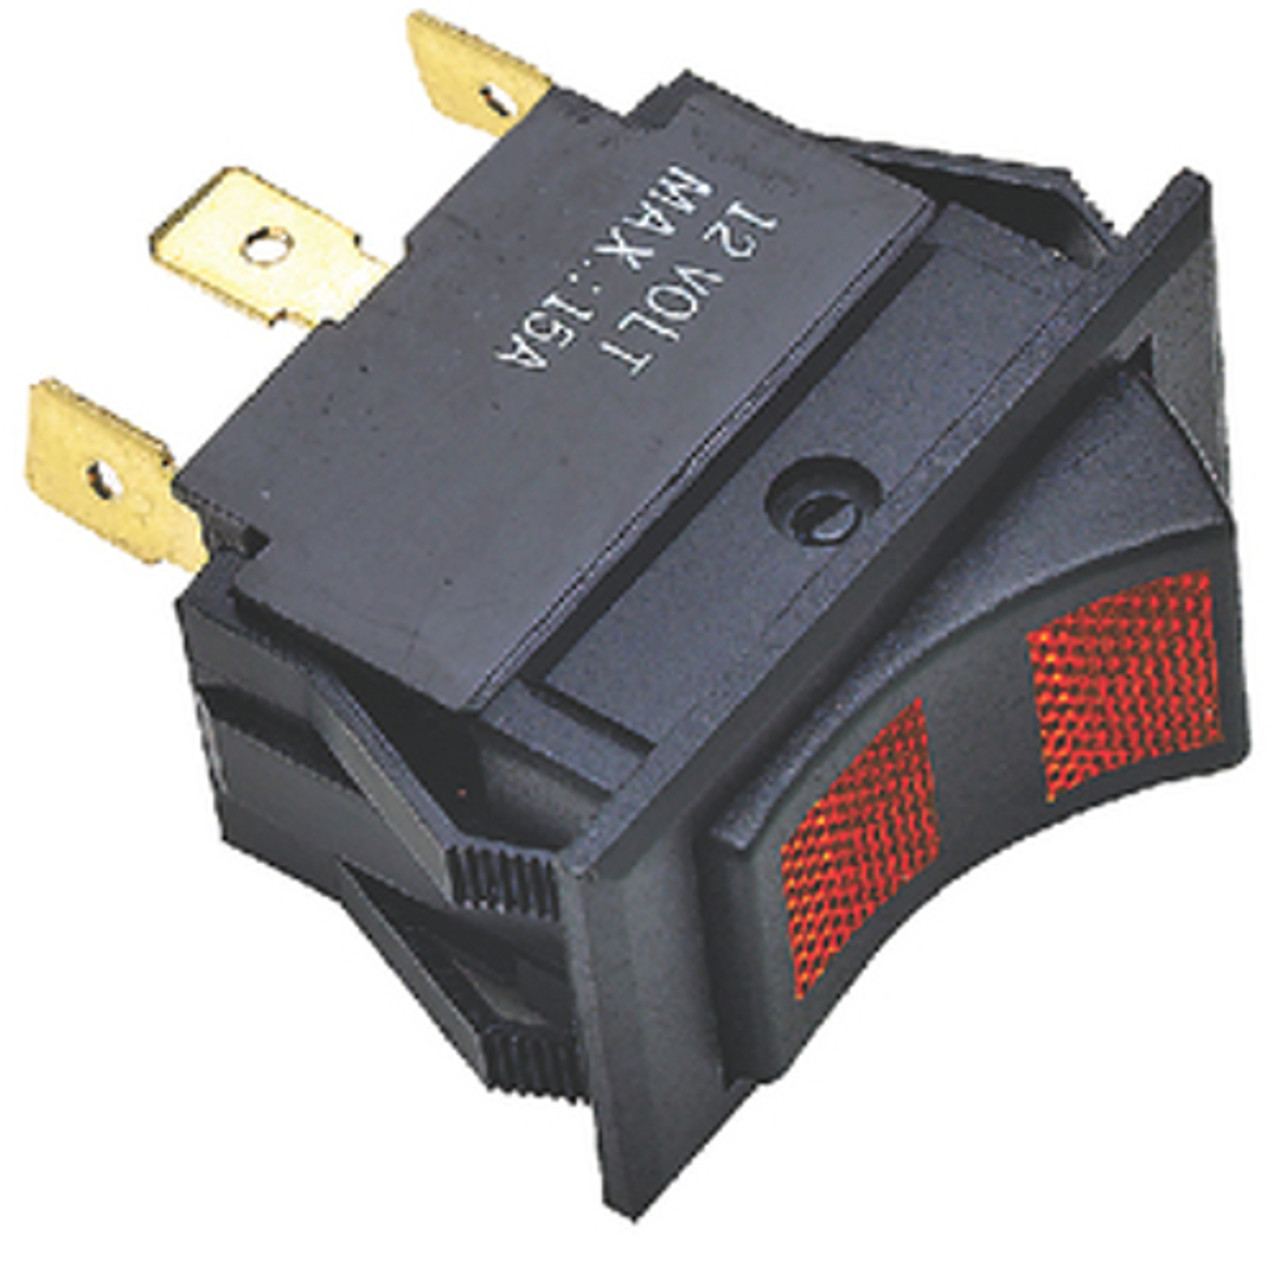 Black Illuminated DPDT 3 Position On / Off / On Rocker Switch for Boats